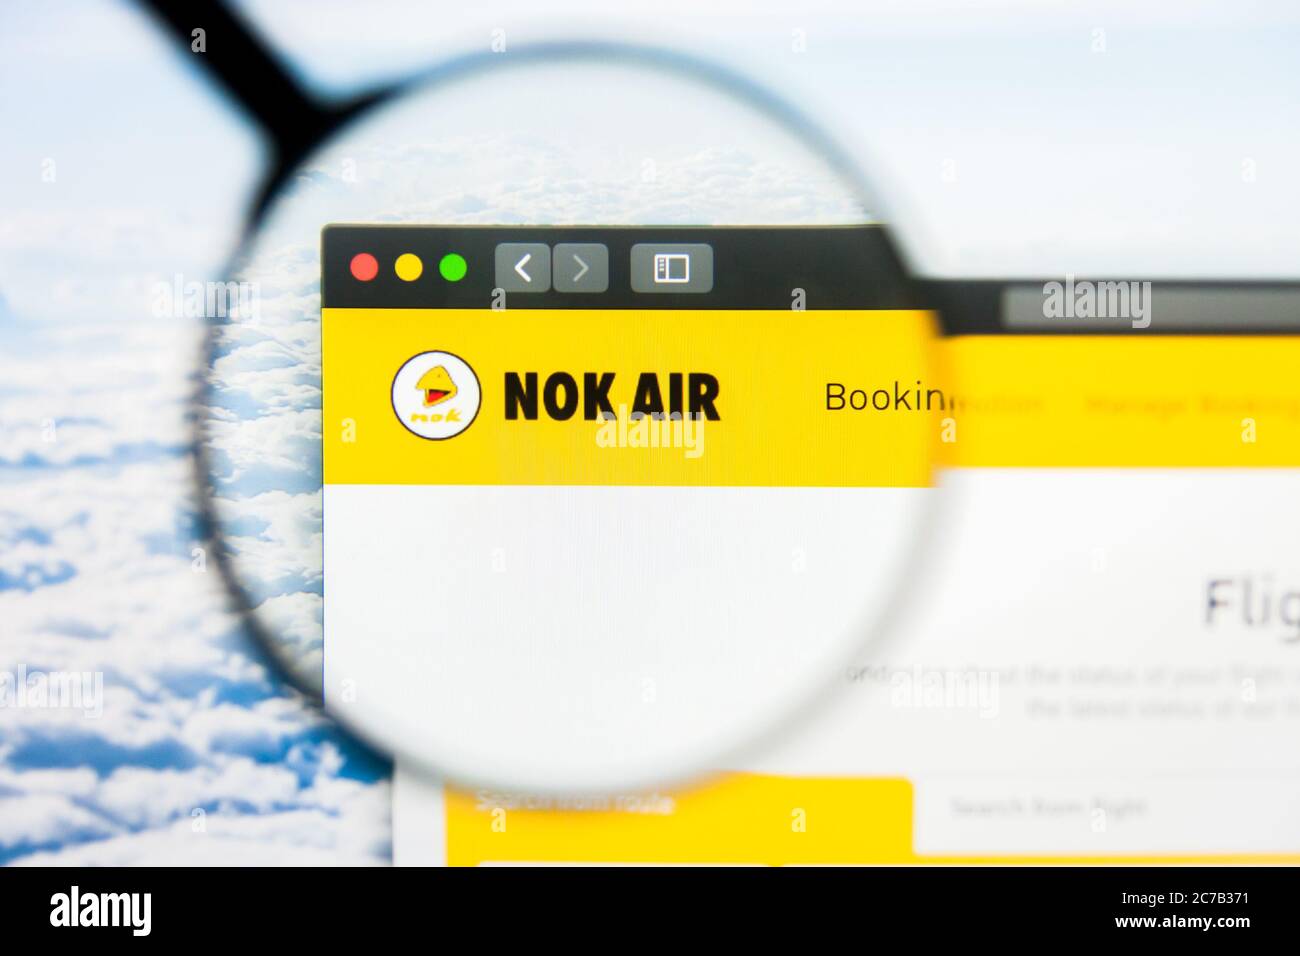 Los Angeles, California, USA - 21 March 2019: Illustrative Editorial of Nok Air website homepage. Nok Air logo visible on display screen. Stock Photo